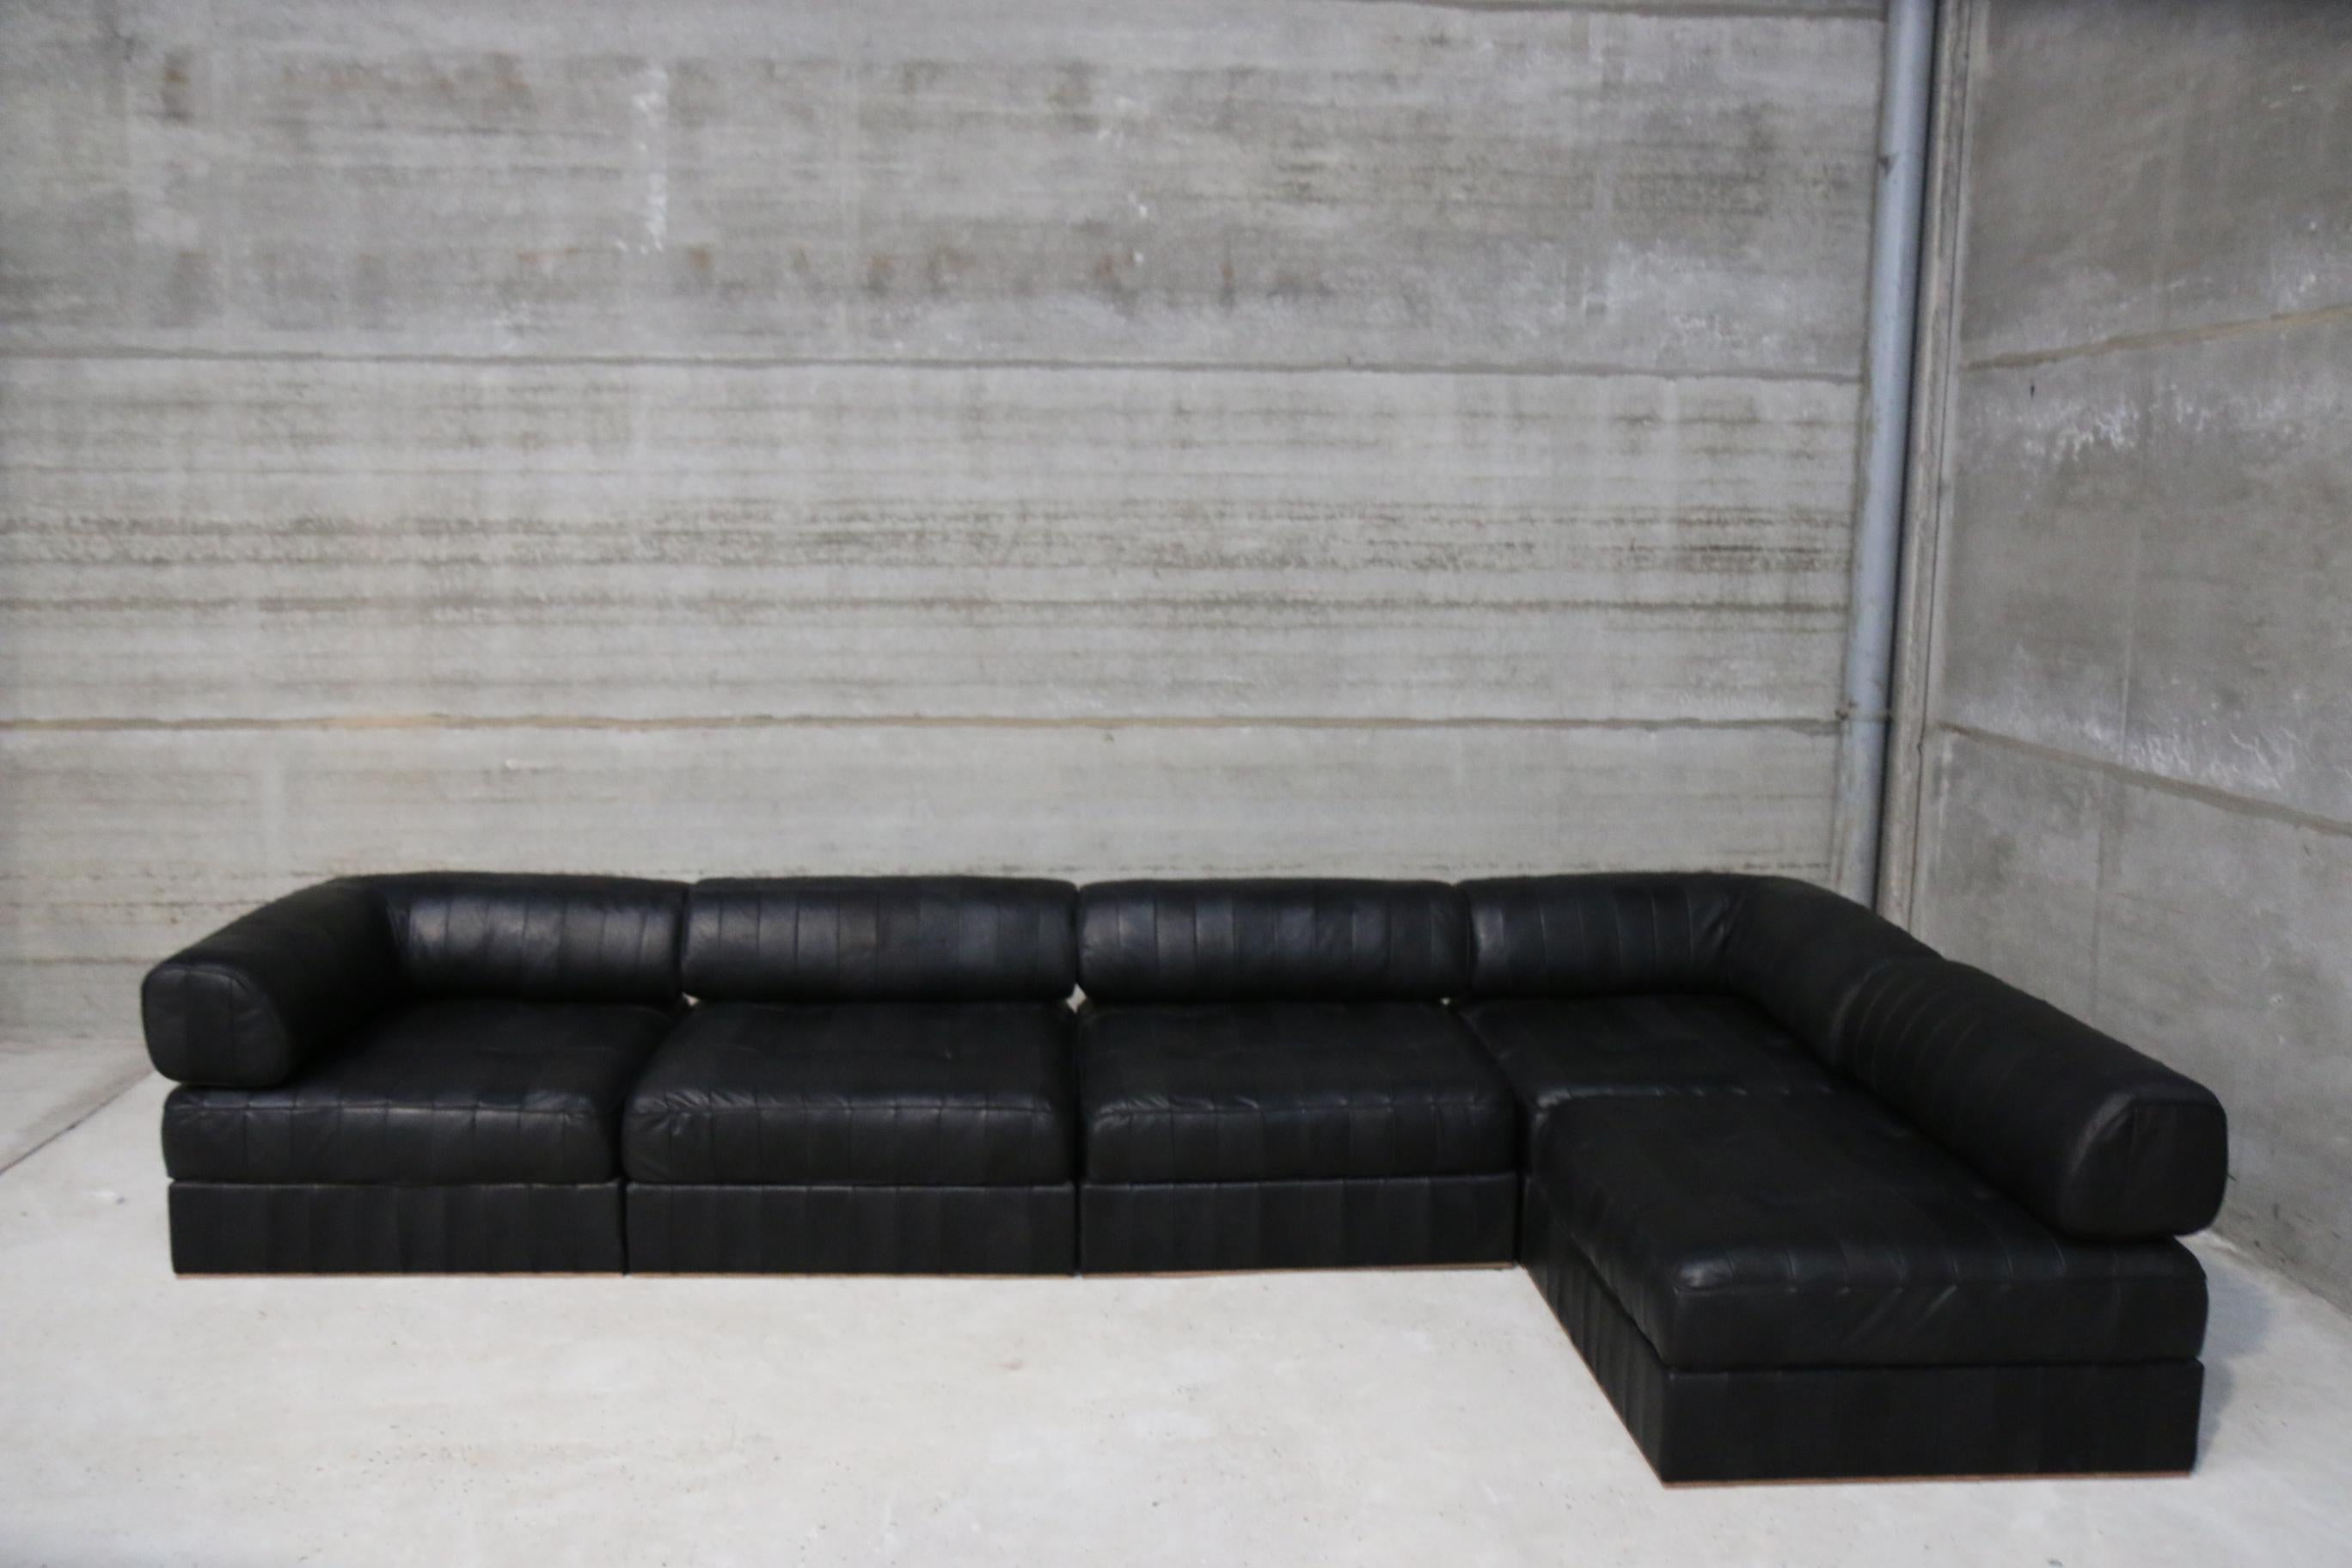 This modular lounge set from Swiss manufacturer De Sede was re-upholstered in our funky vintage studio in Belgium. The leather used for this patchwork is a full grain black leather from European bulls and colored biologically. More then 8000 pieces